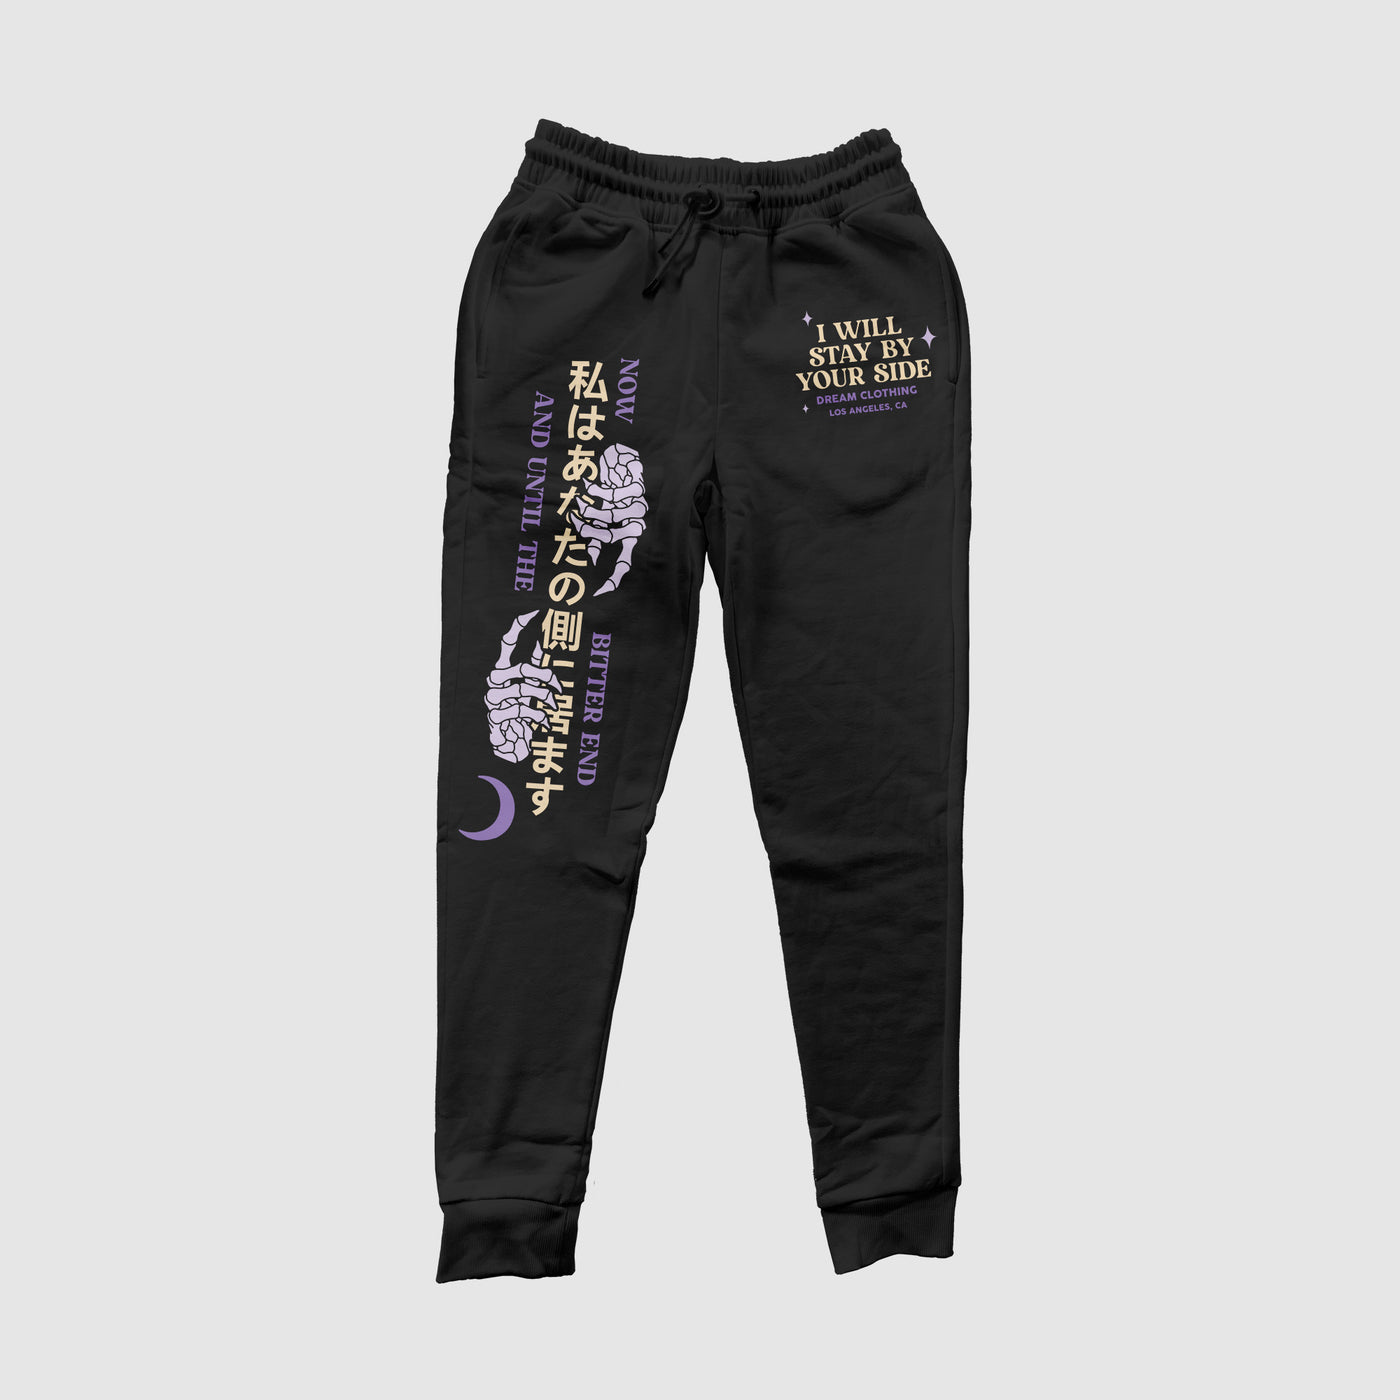 I Will Stay By Your Side Jogger PantsIntroducing "I Will Stay By Your Side," a design that beautifully captures the emotions of Separation Anxiety, Fear, and Comfort. This message serves as a source of DREAM Clothing 